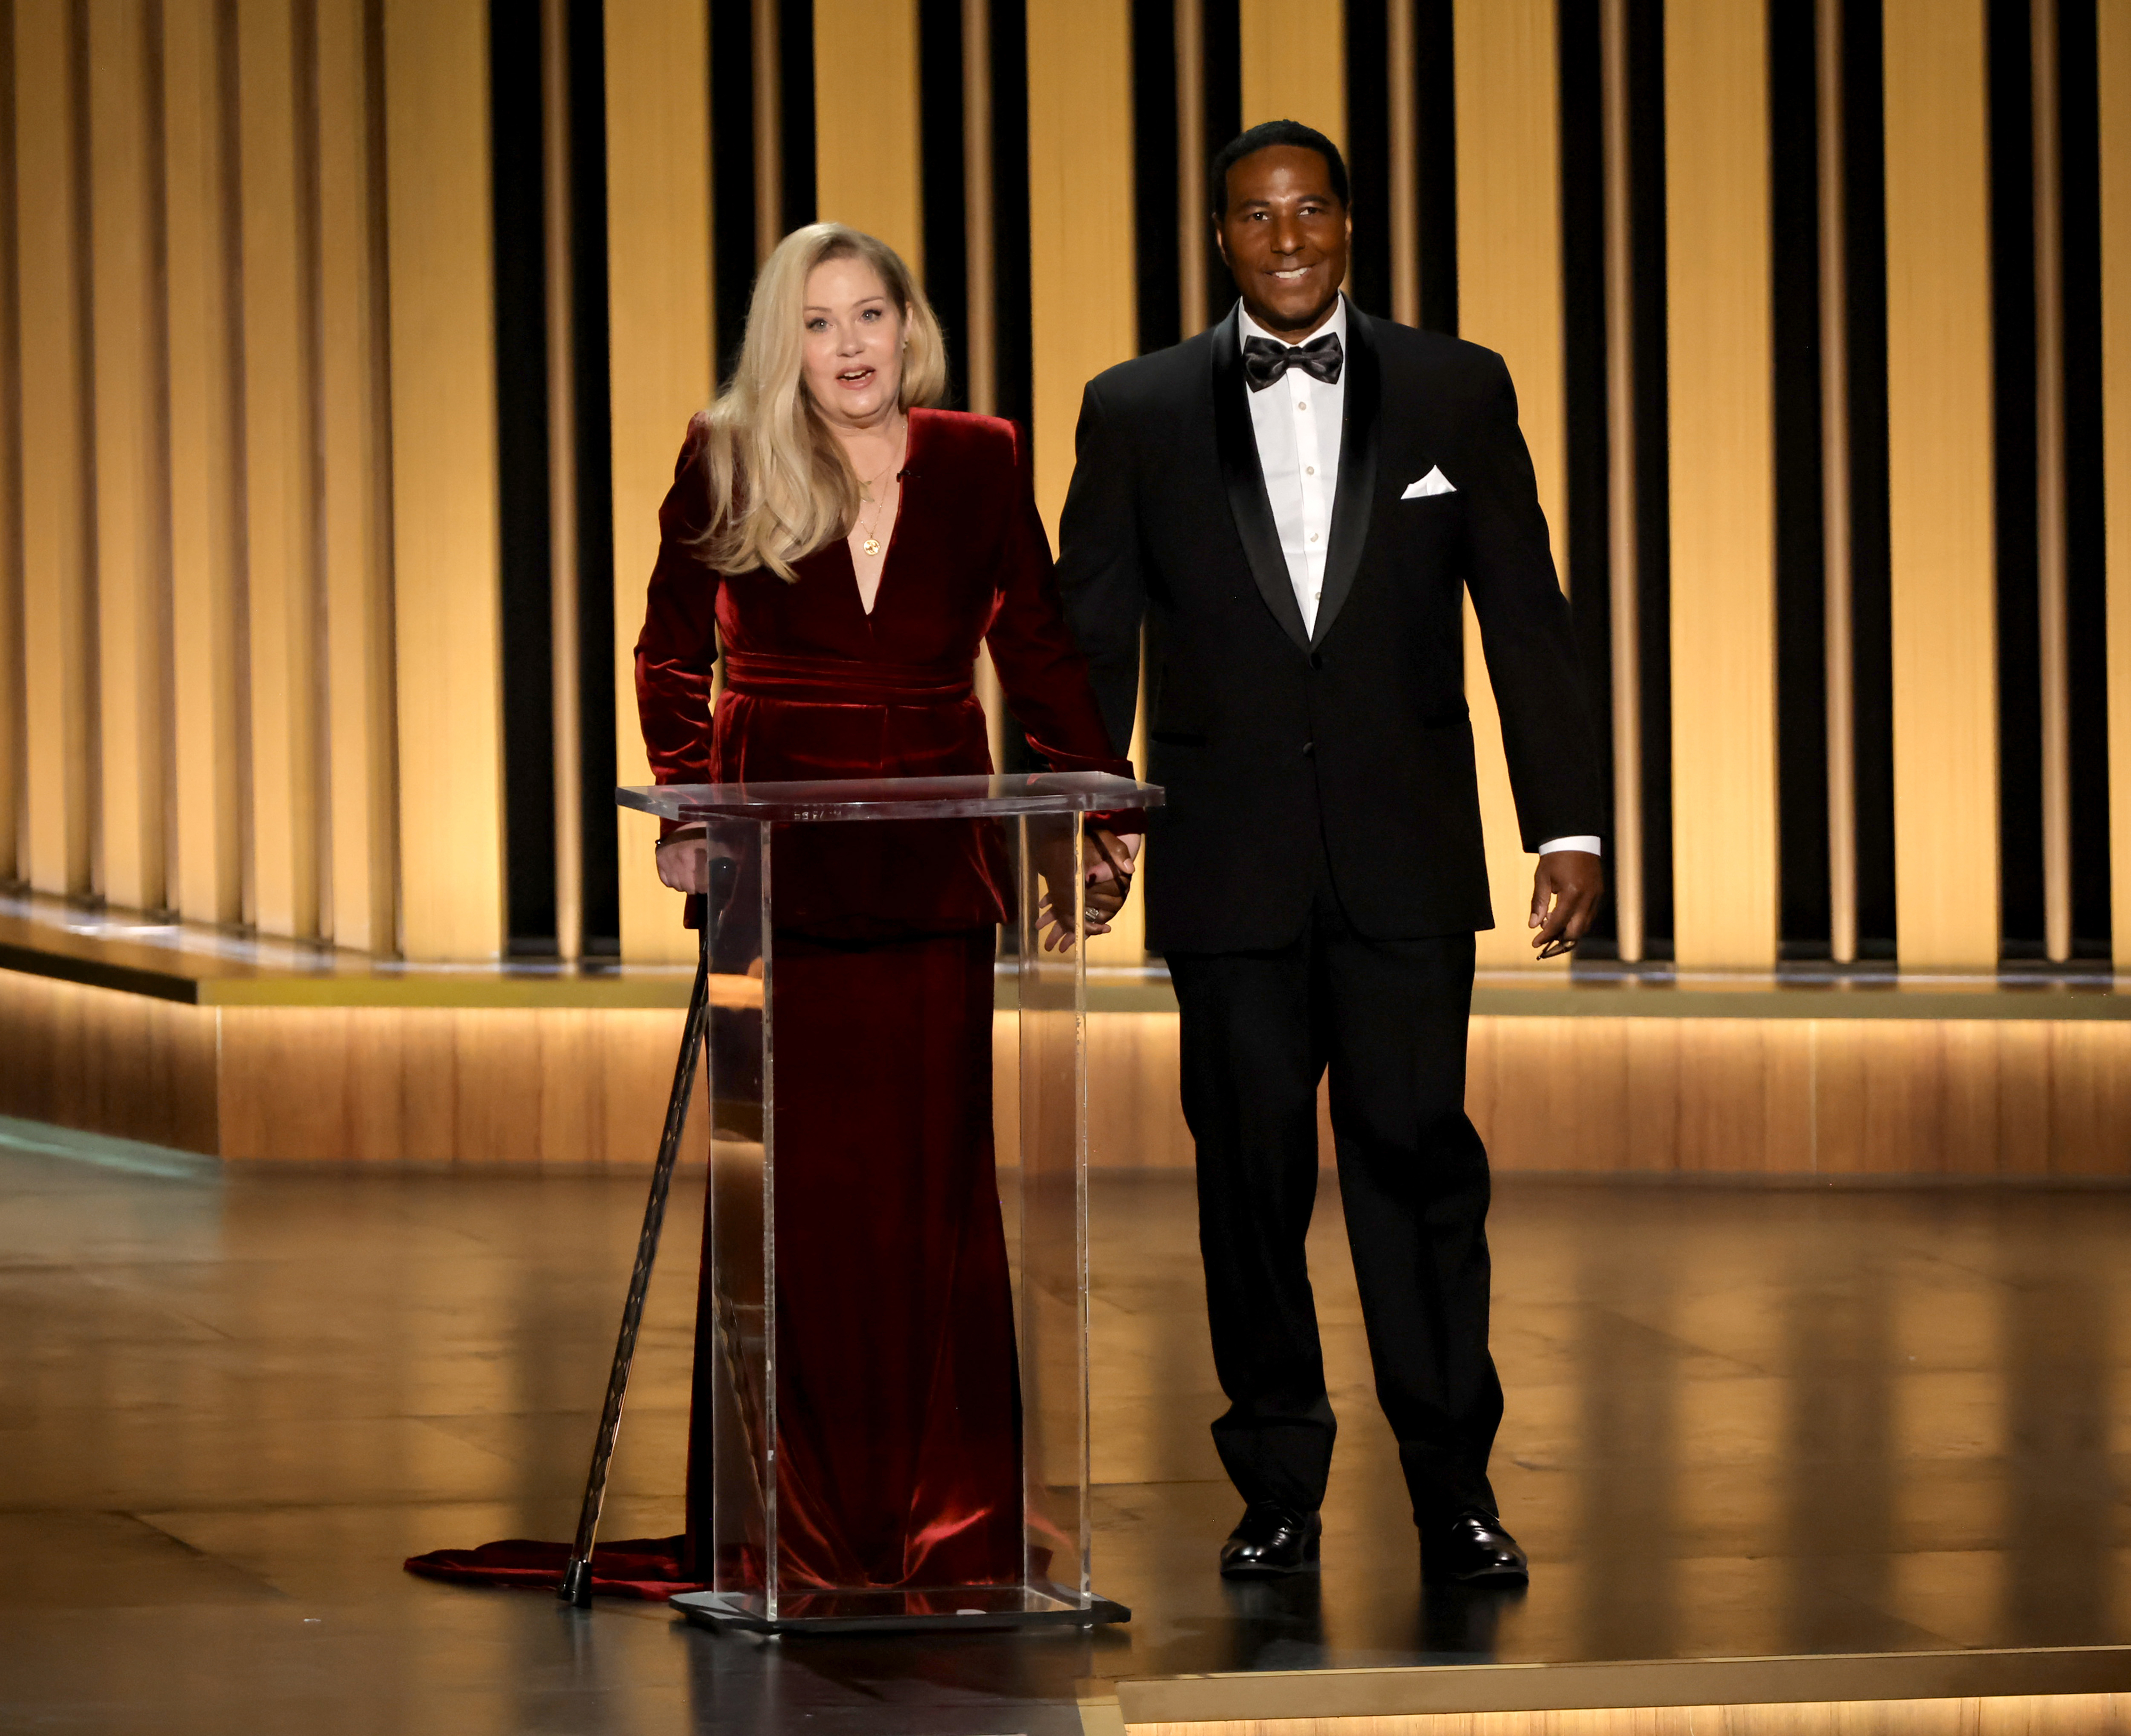 Christina Applegate onstage at the Emmys